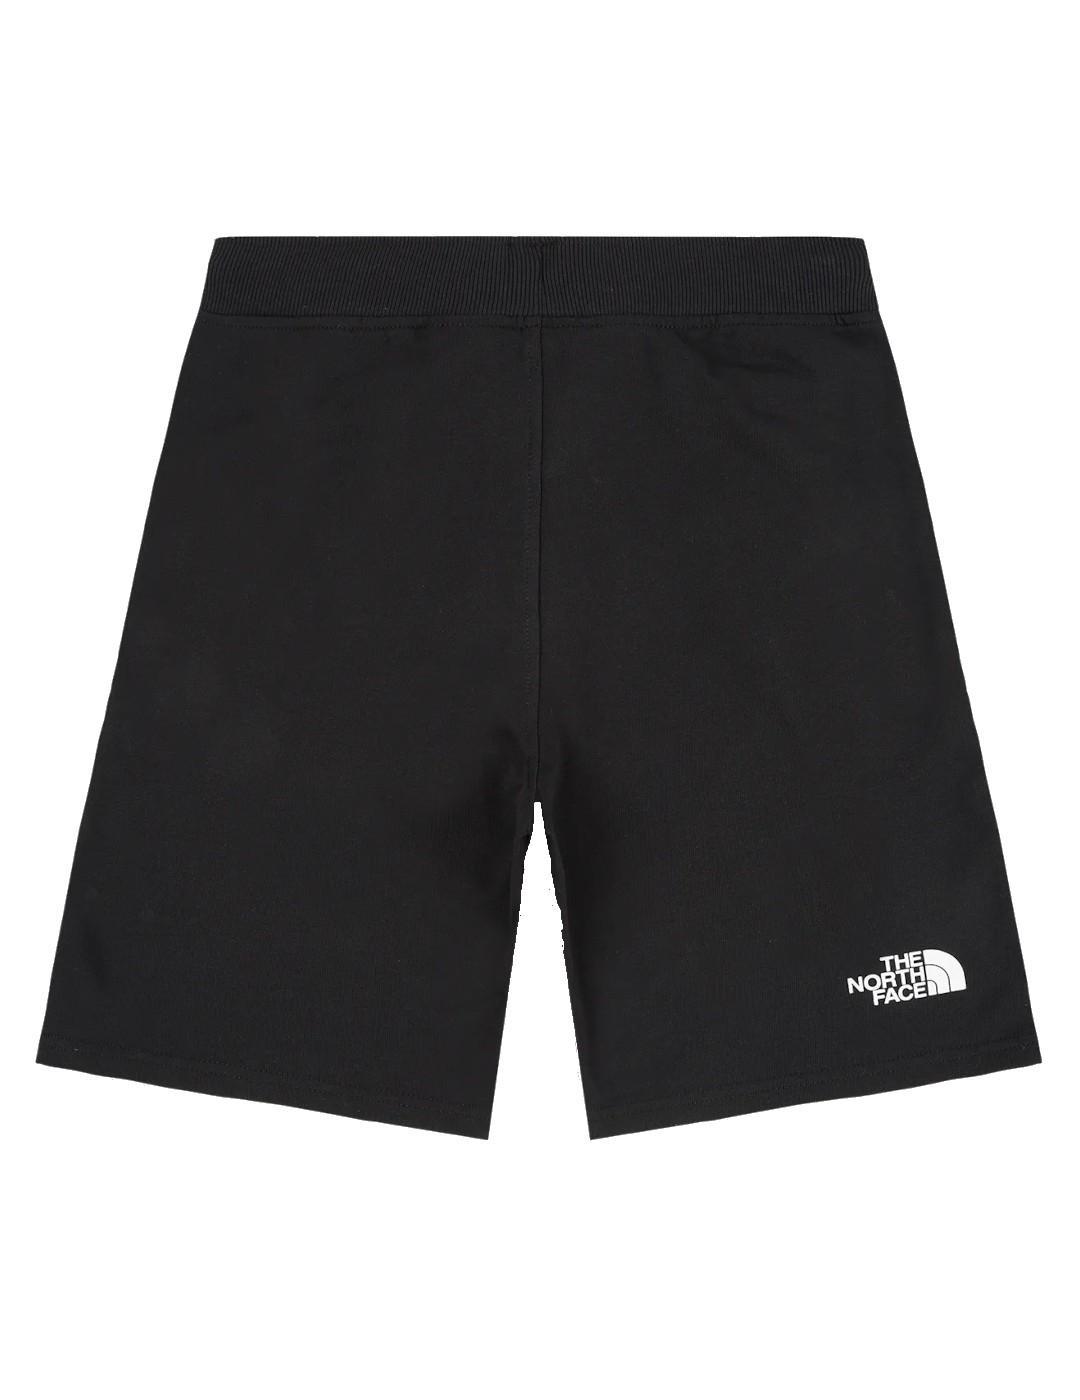 Short Hombre The North Face Stand Negro